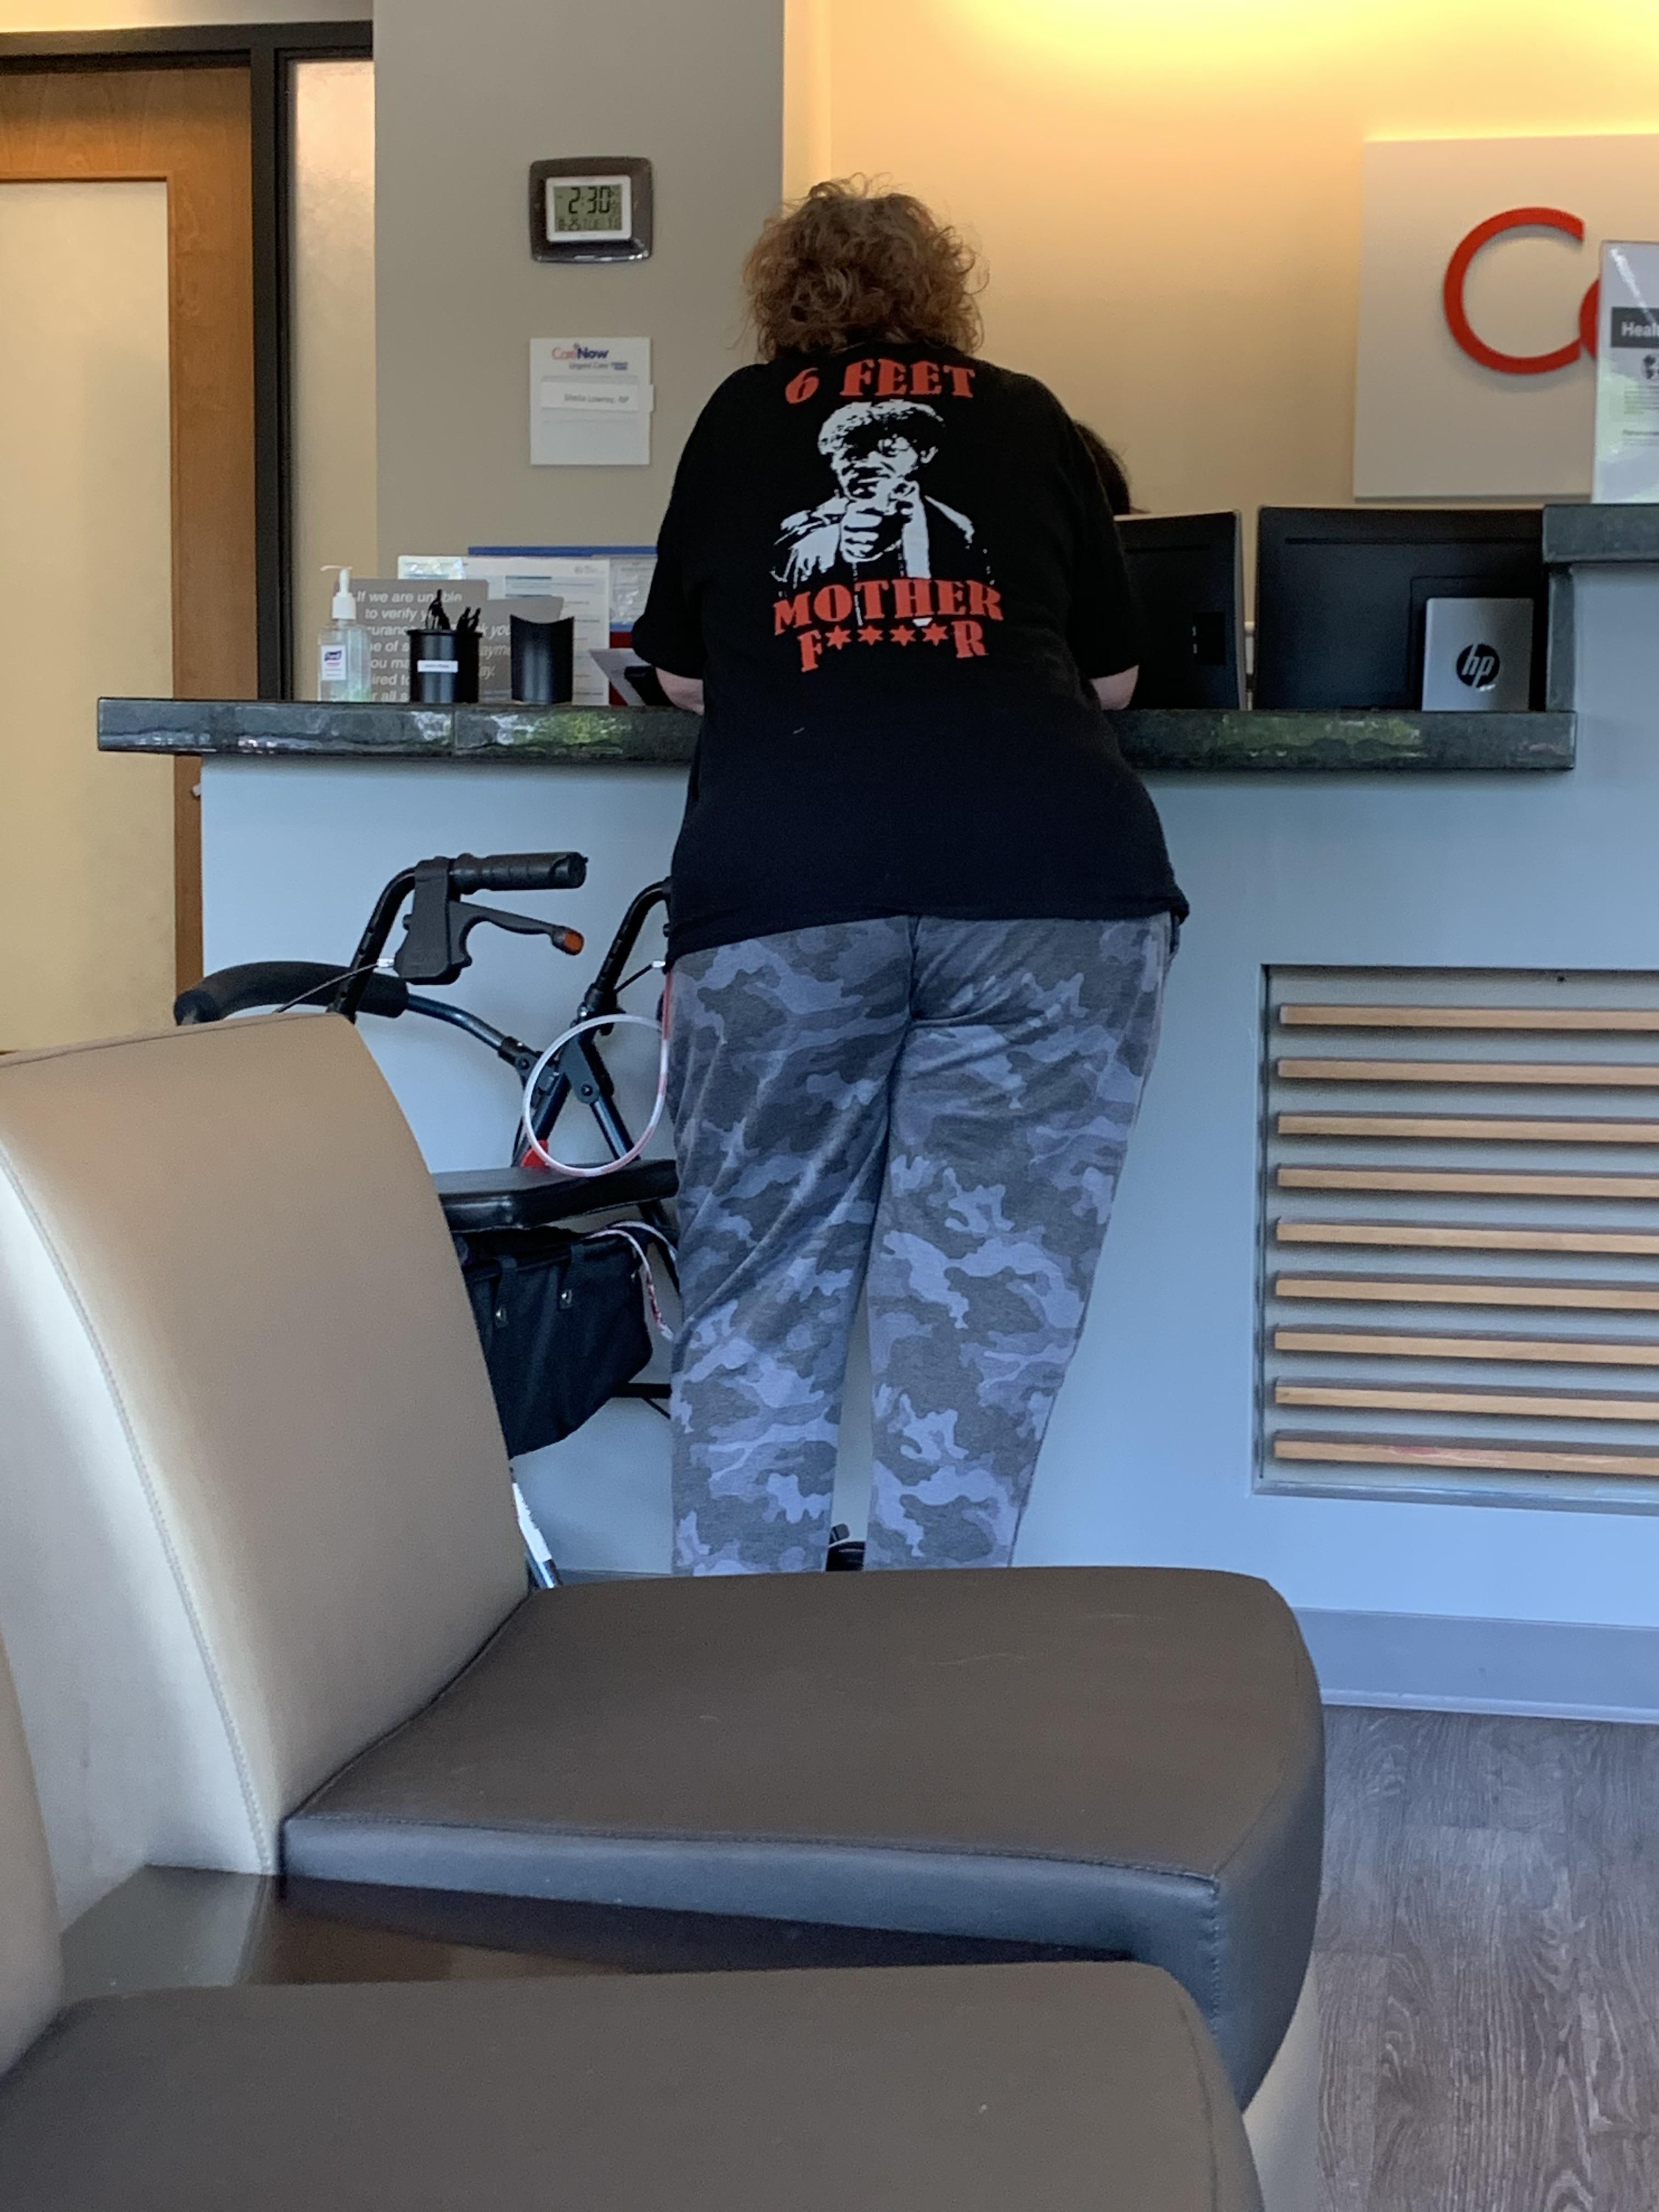 This lady’s shirt at the clinic waiting room I’m sitting in